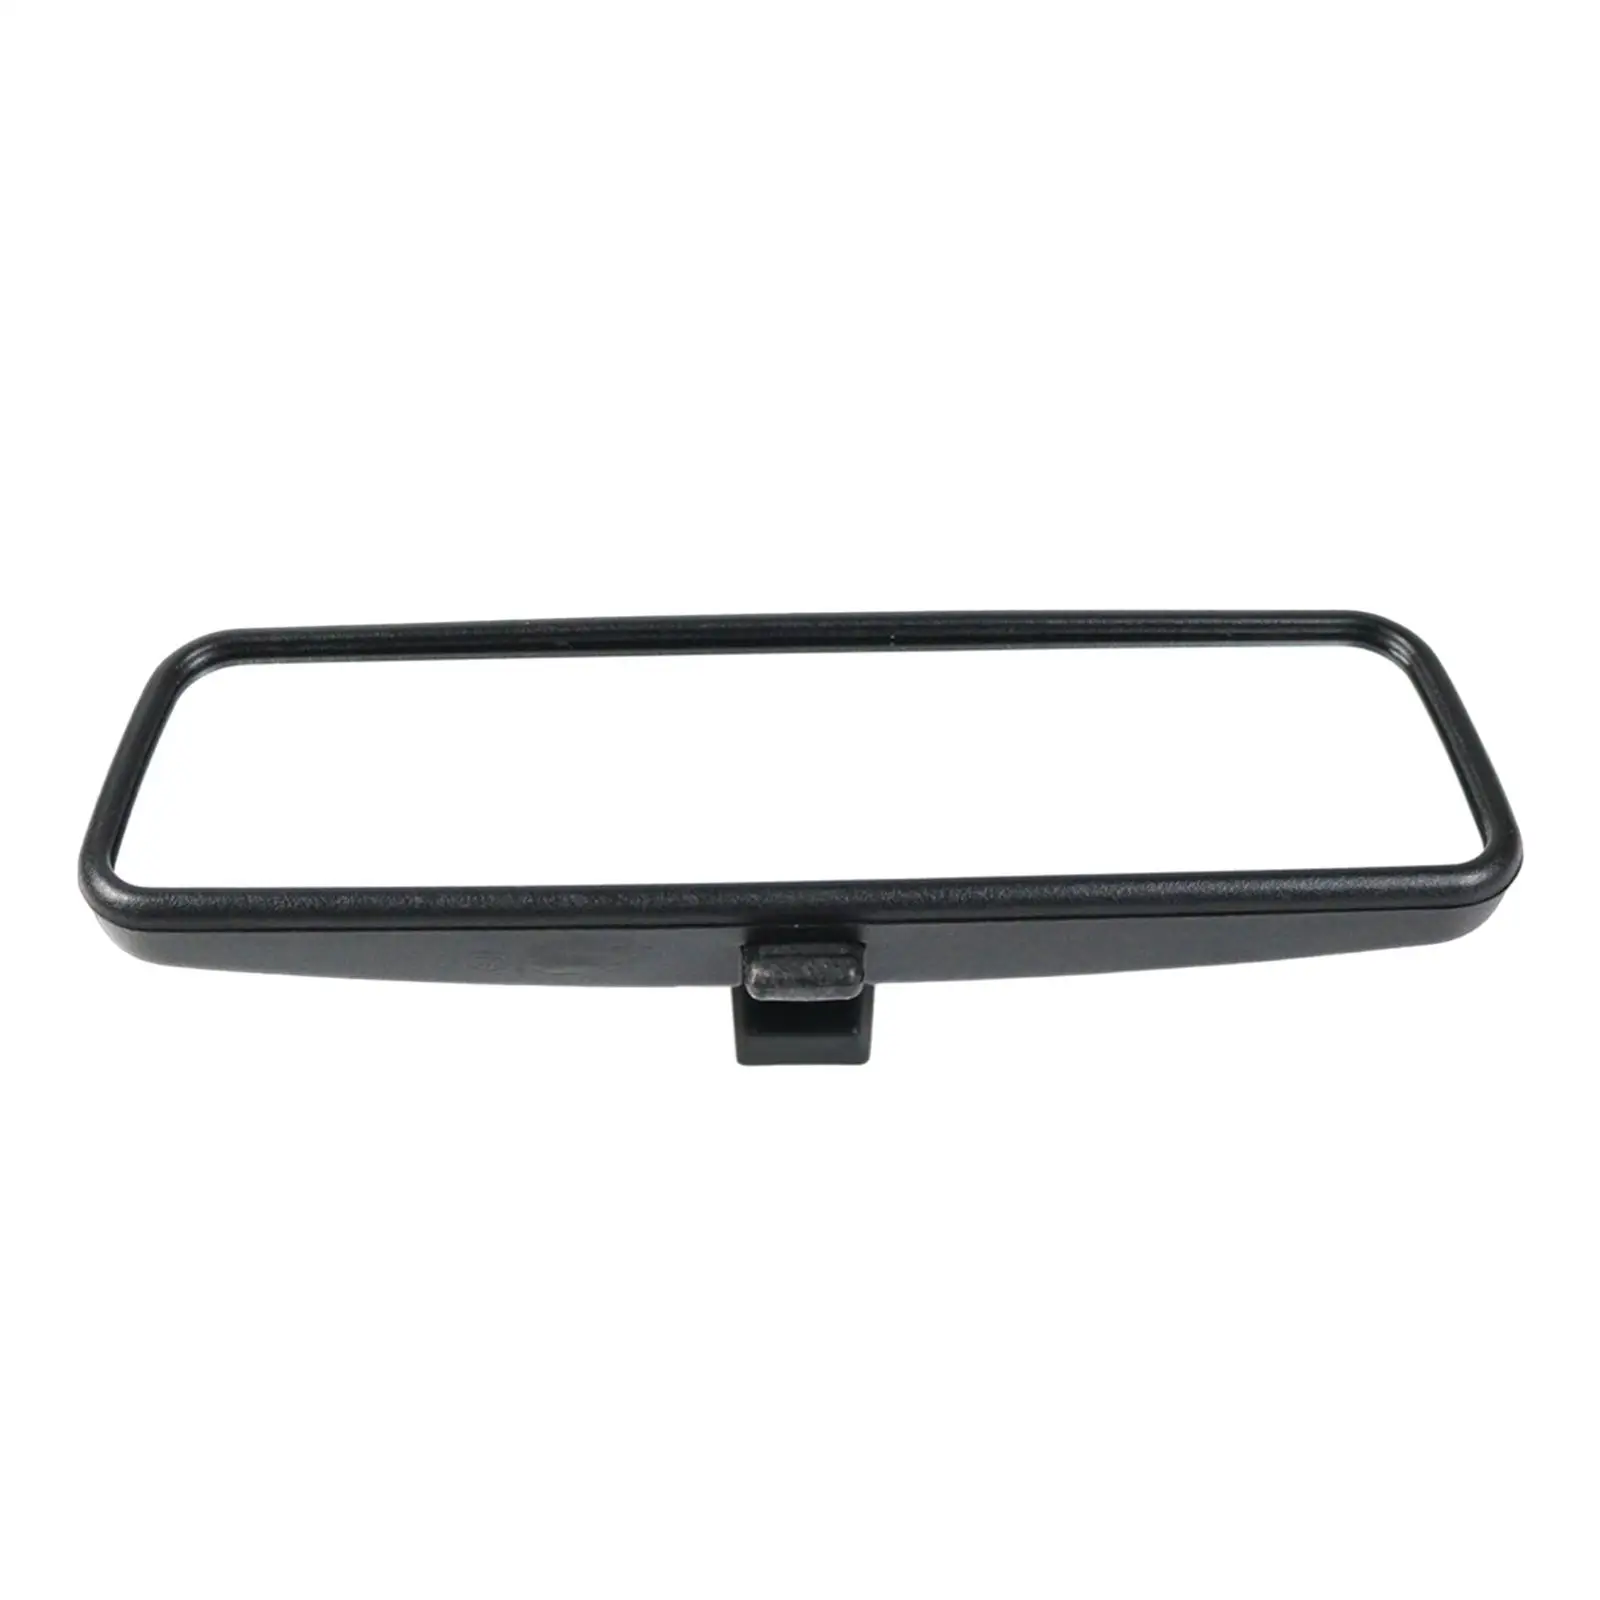 Interior Rear View Mirror, 814842 for C1 Car Replaces Durable Auto Accessories